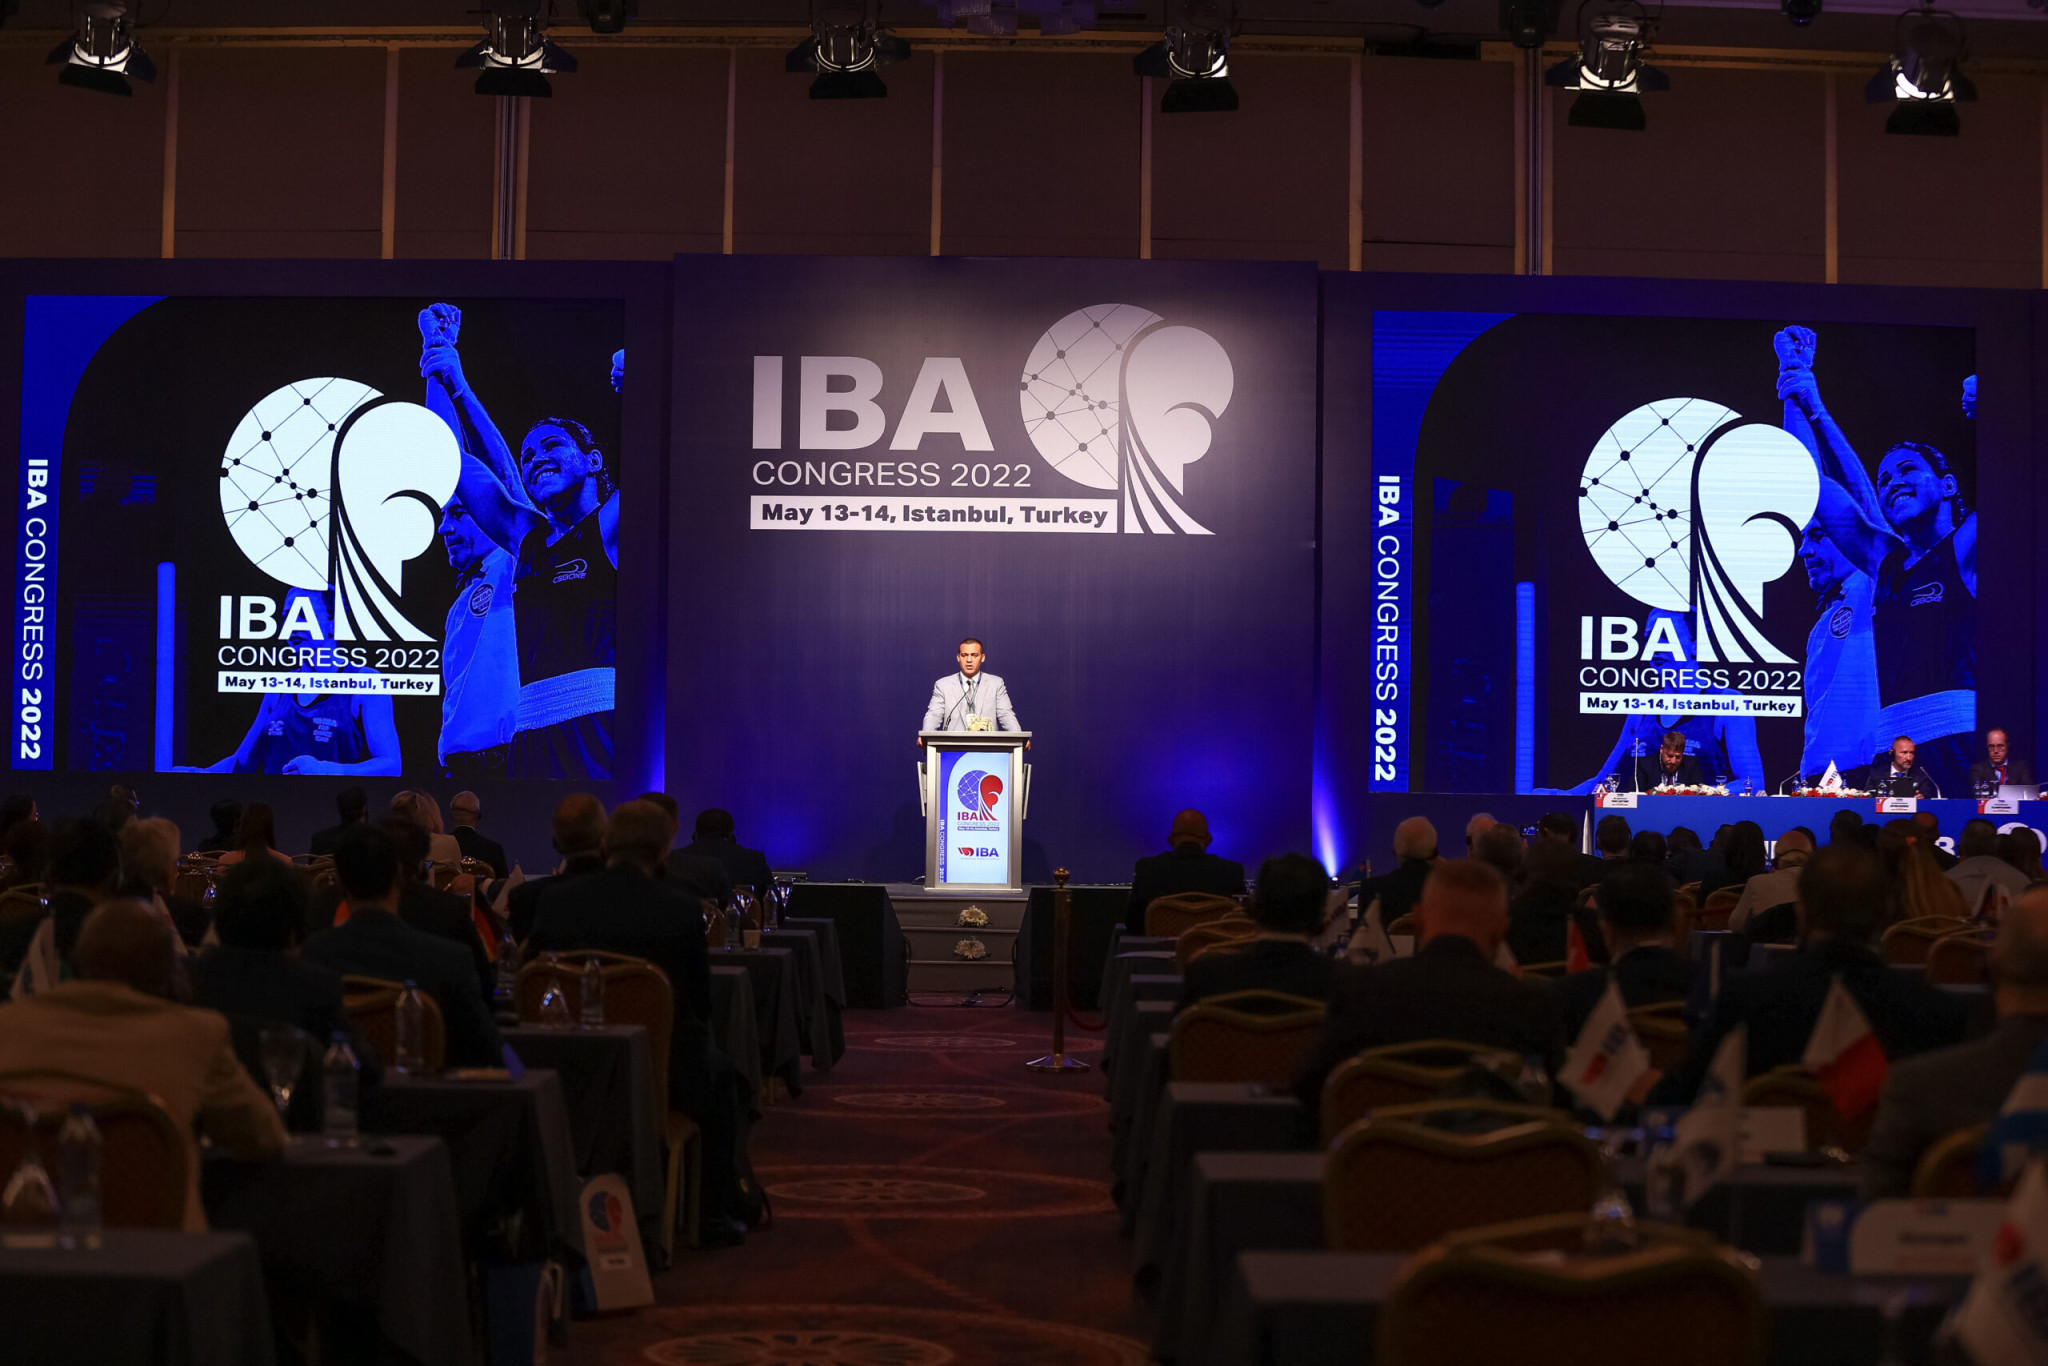 Umar Kremlev was elected unopposed at the Extraordinary Congress in Istanbul, but the CAS ruled that his rival for the Presidency Boris van der Vorst should have been allowed to stand ©IBA